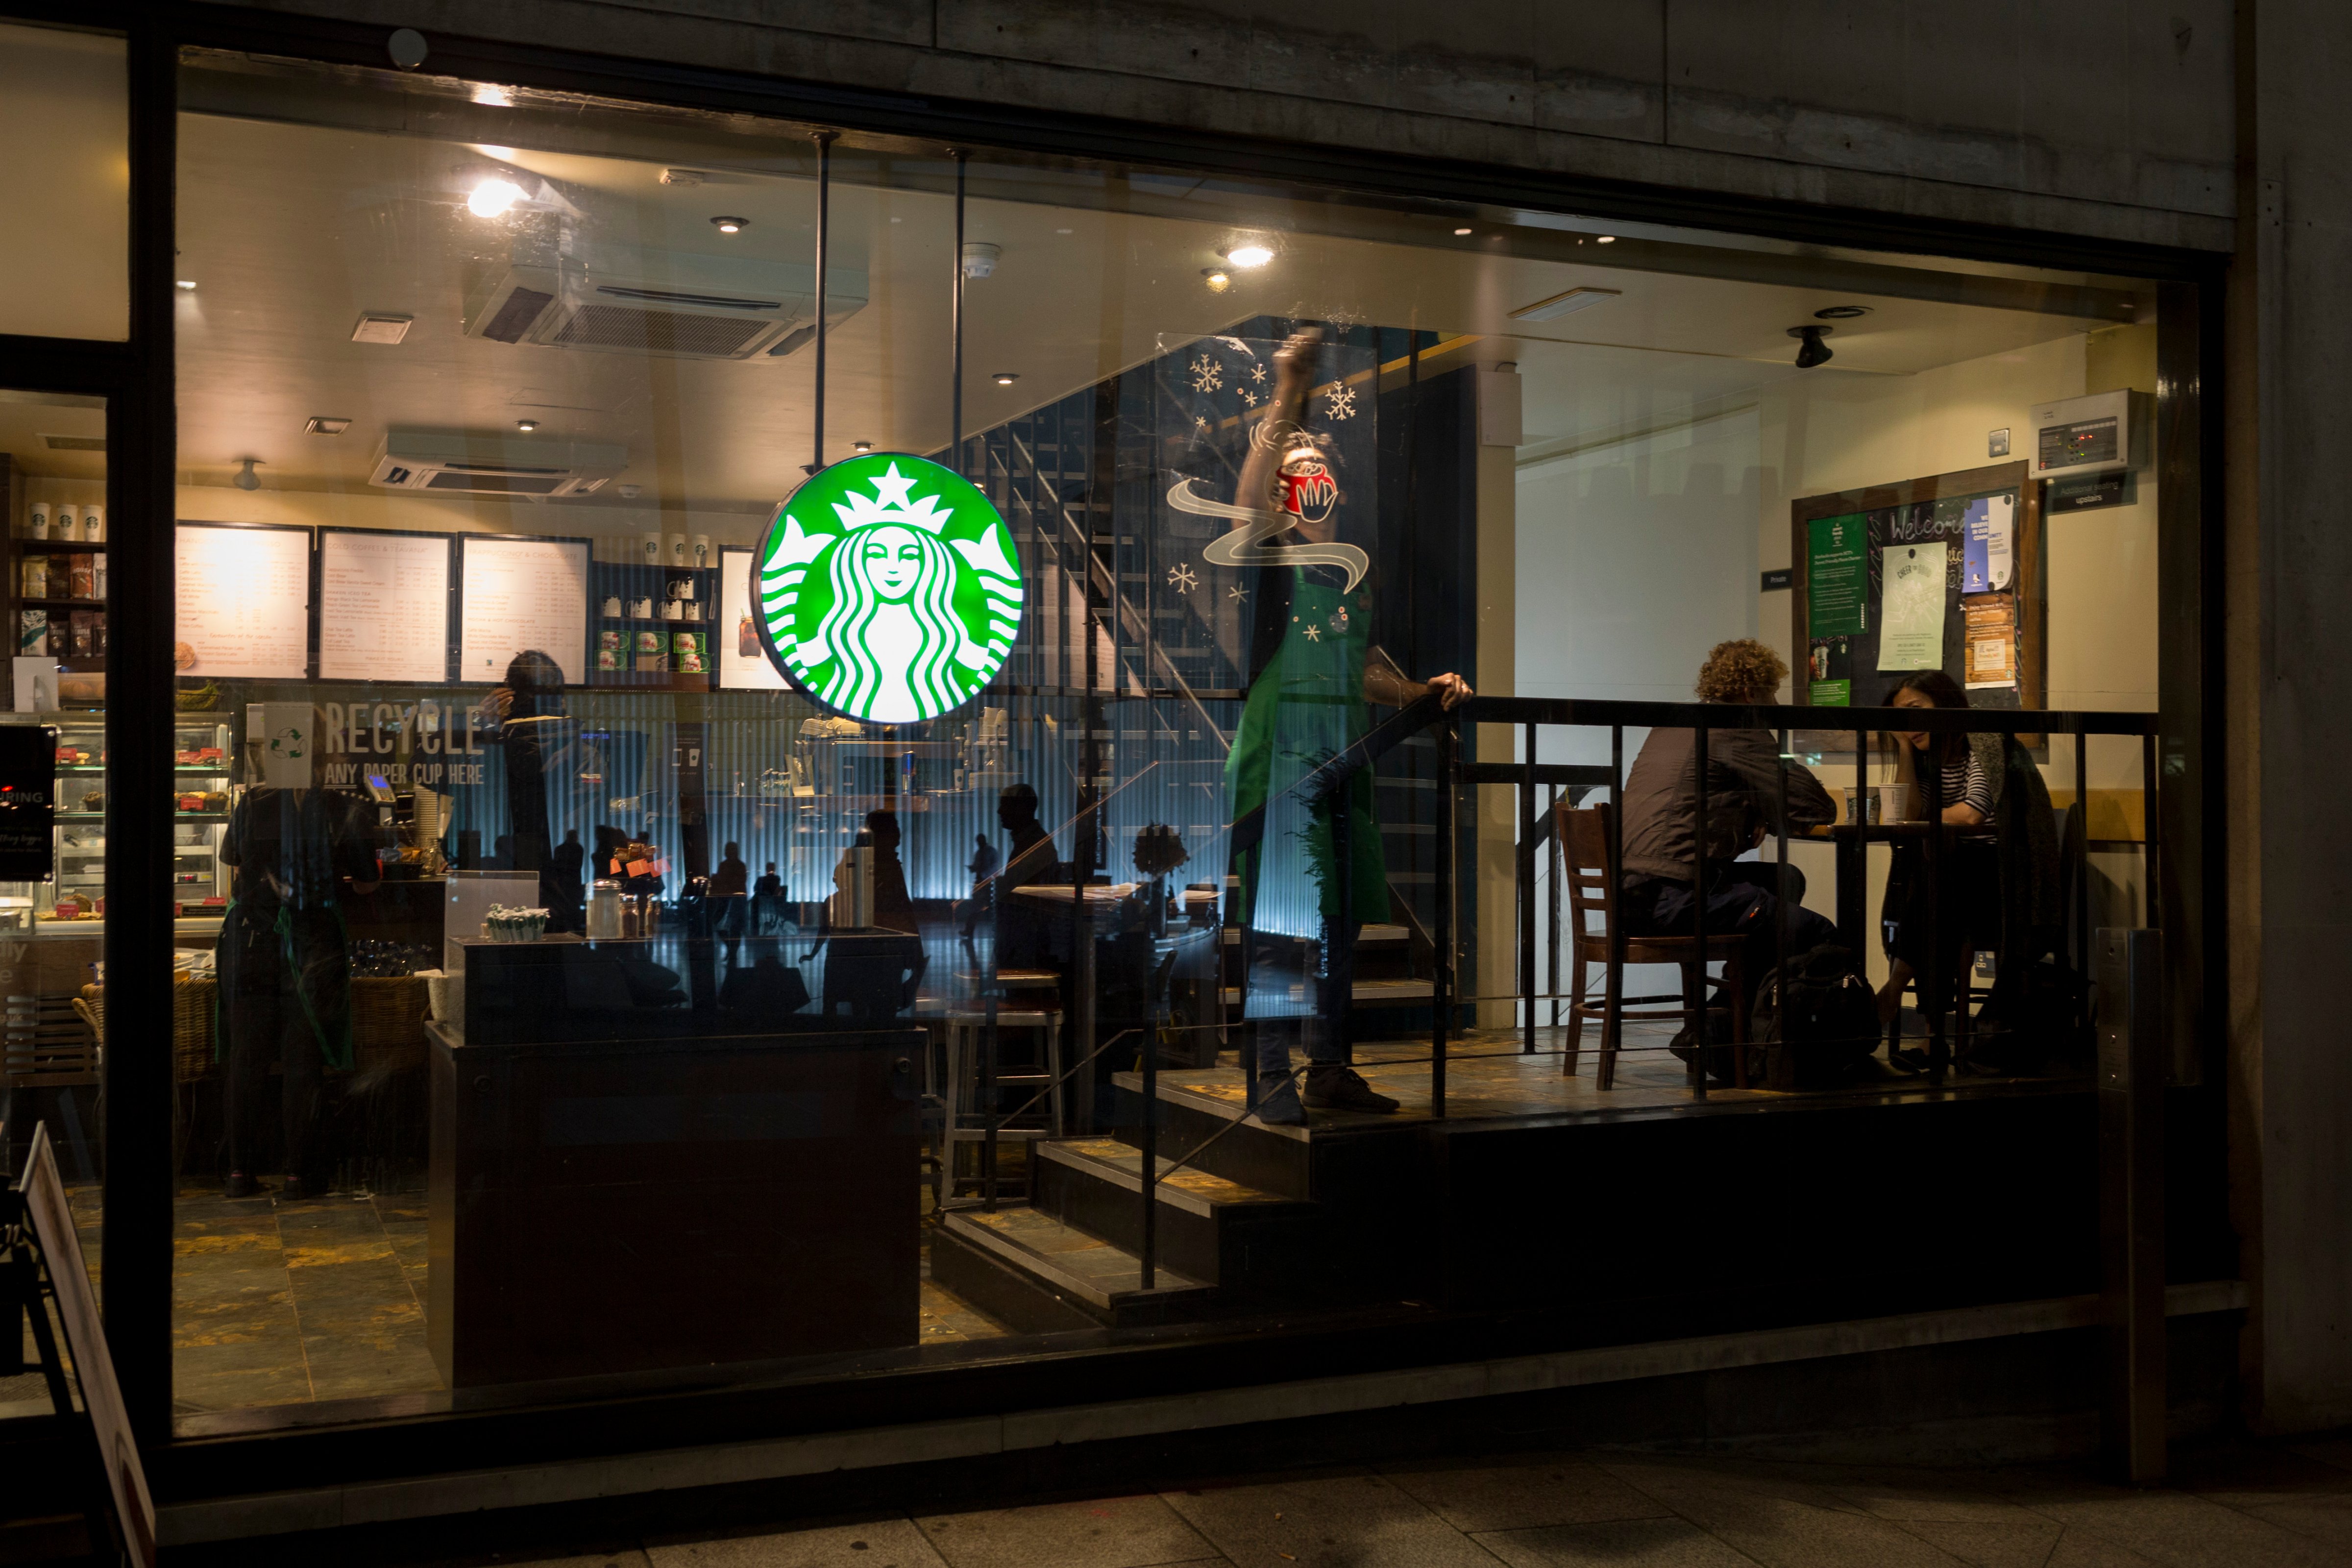 A stock photo of Starbucks. (Richard Bake—In Pictures via Getty Images)